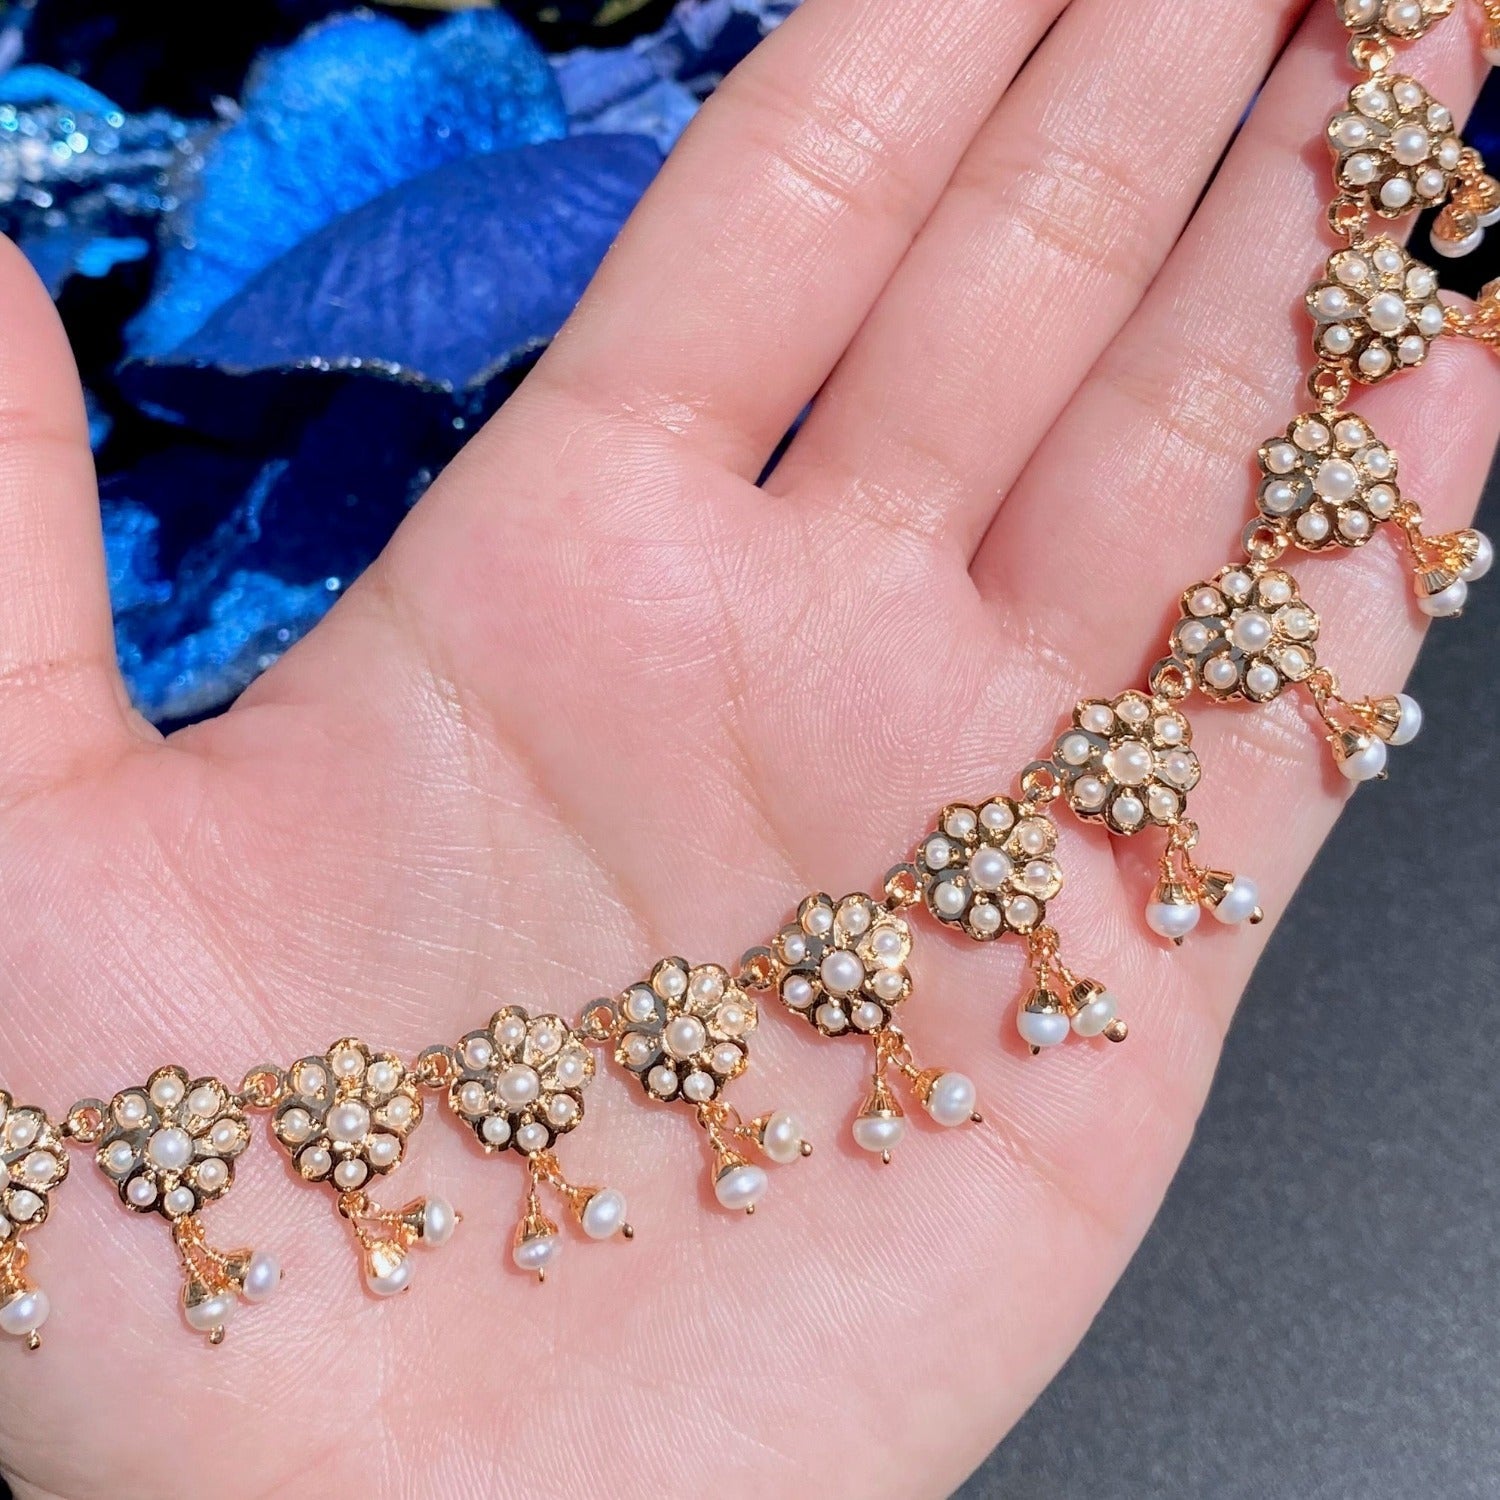 seed pearl necklace